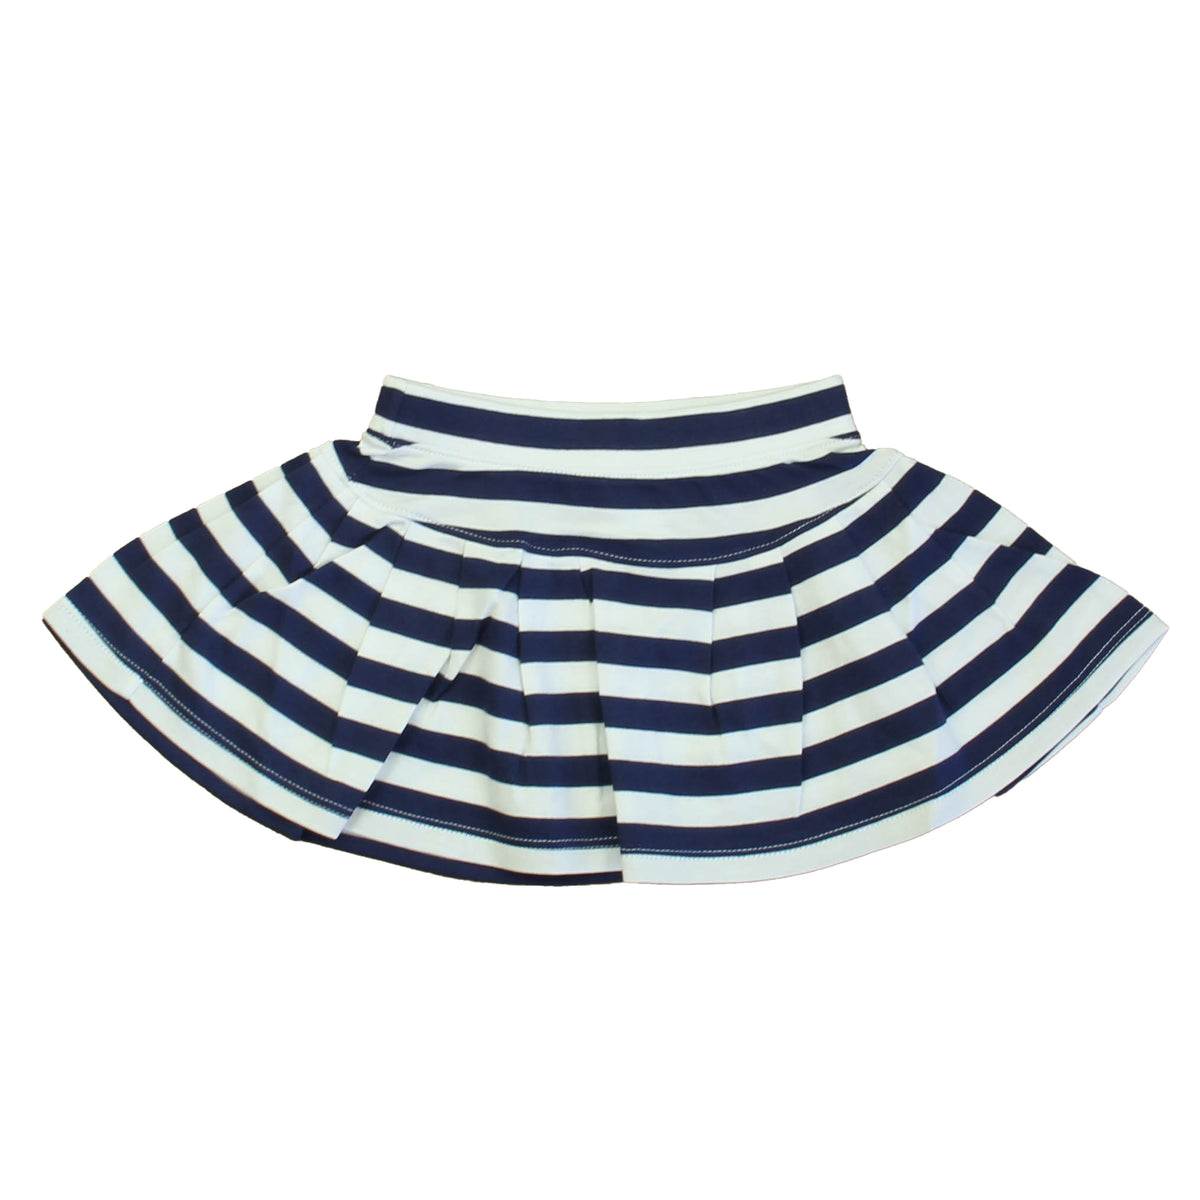 New with Tags: Cornflower Blue | Bright White Stripe Skirt size: 2-5T -- FINAL SALE